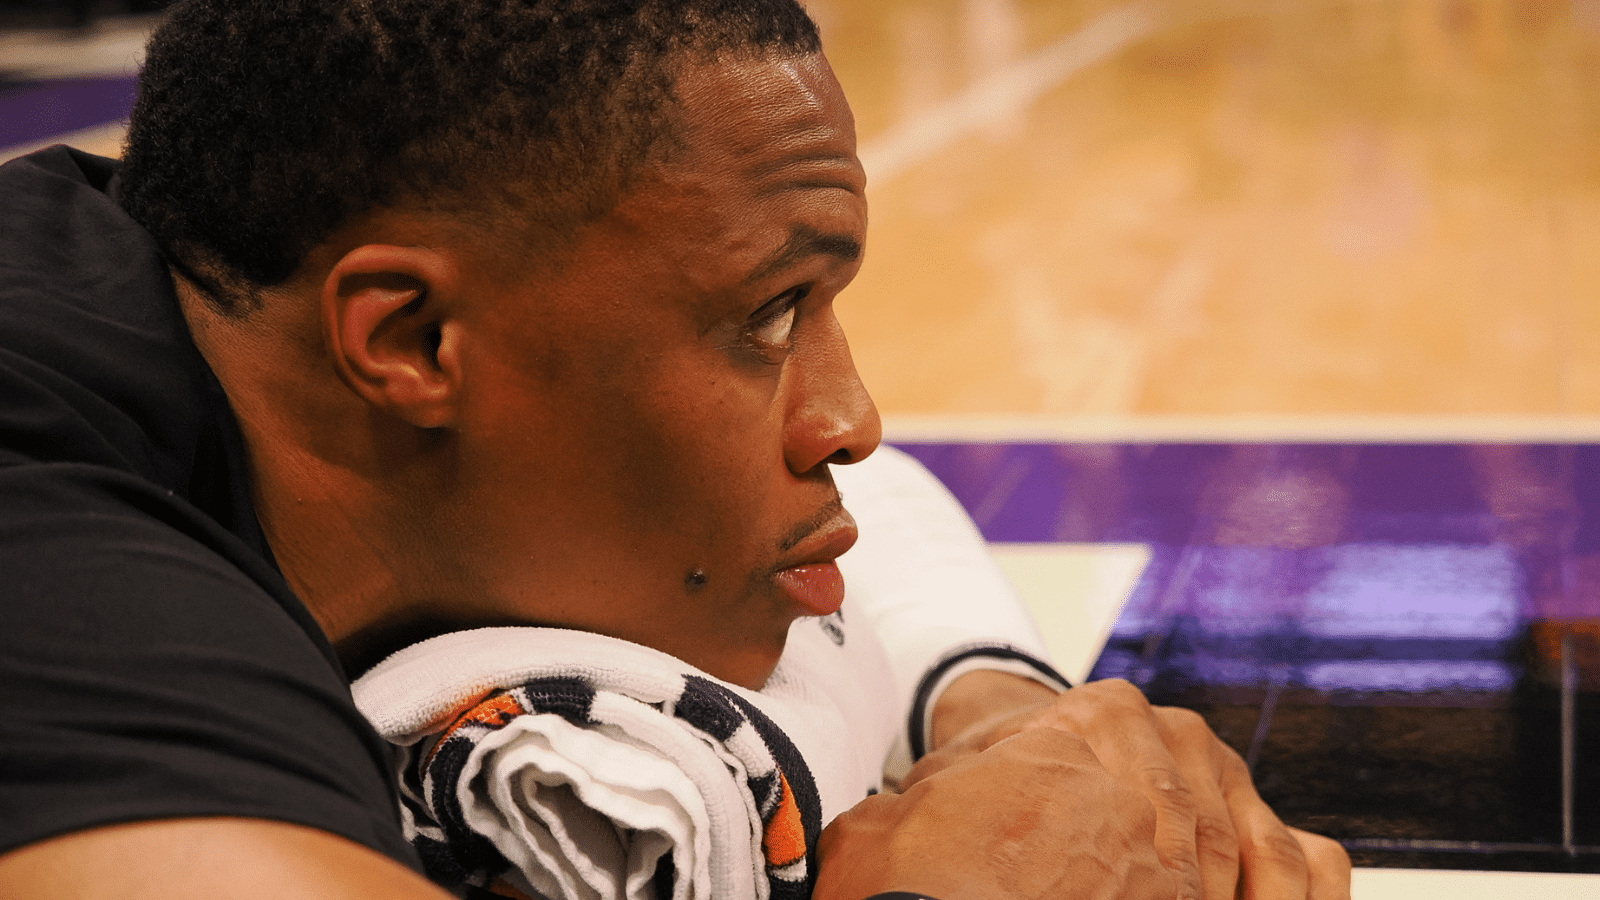 "This Could Be Russell Westbrook's Last Year in the NBA": Fans Can't Digest the News About Brodie Possibly Ending His Career